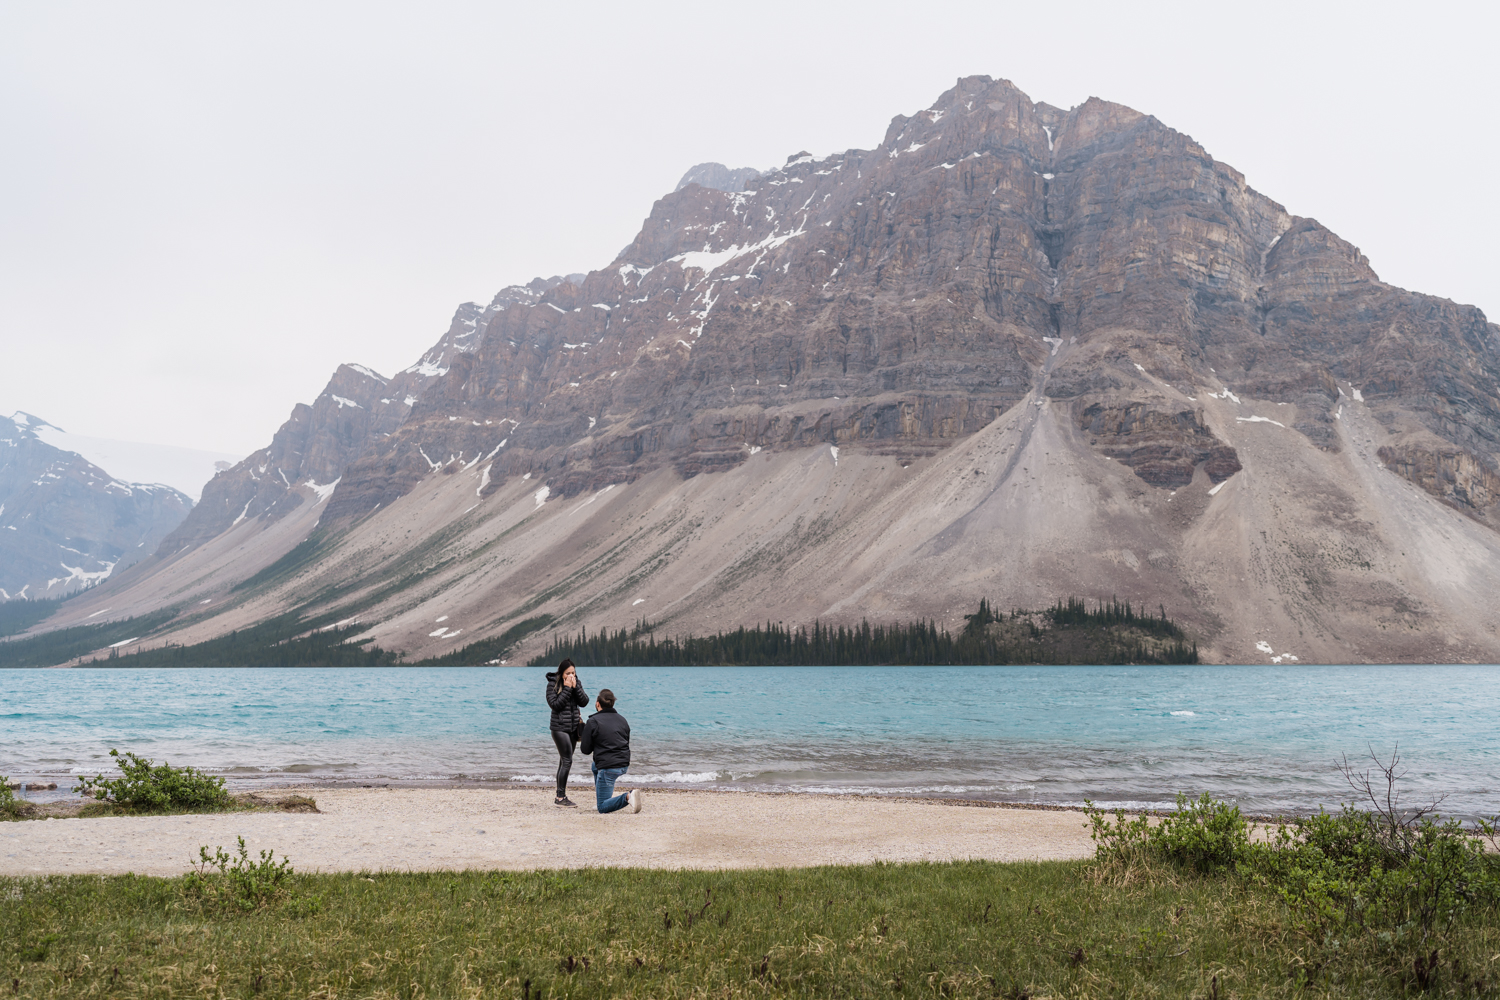 man in black jacket is down on one knee infront of woman in black jacket standing next to Bow Lake in Banff National Park proposing